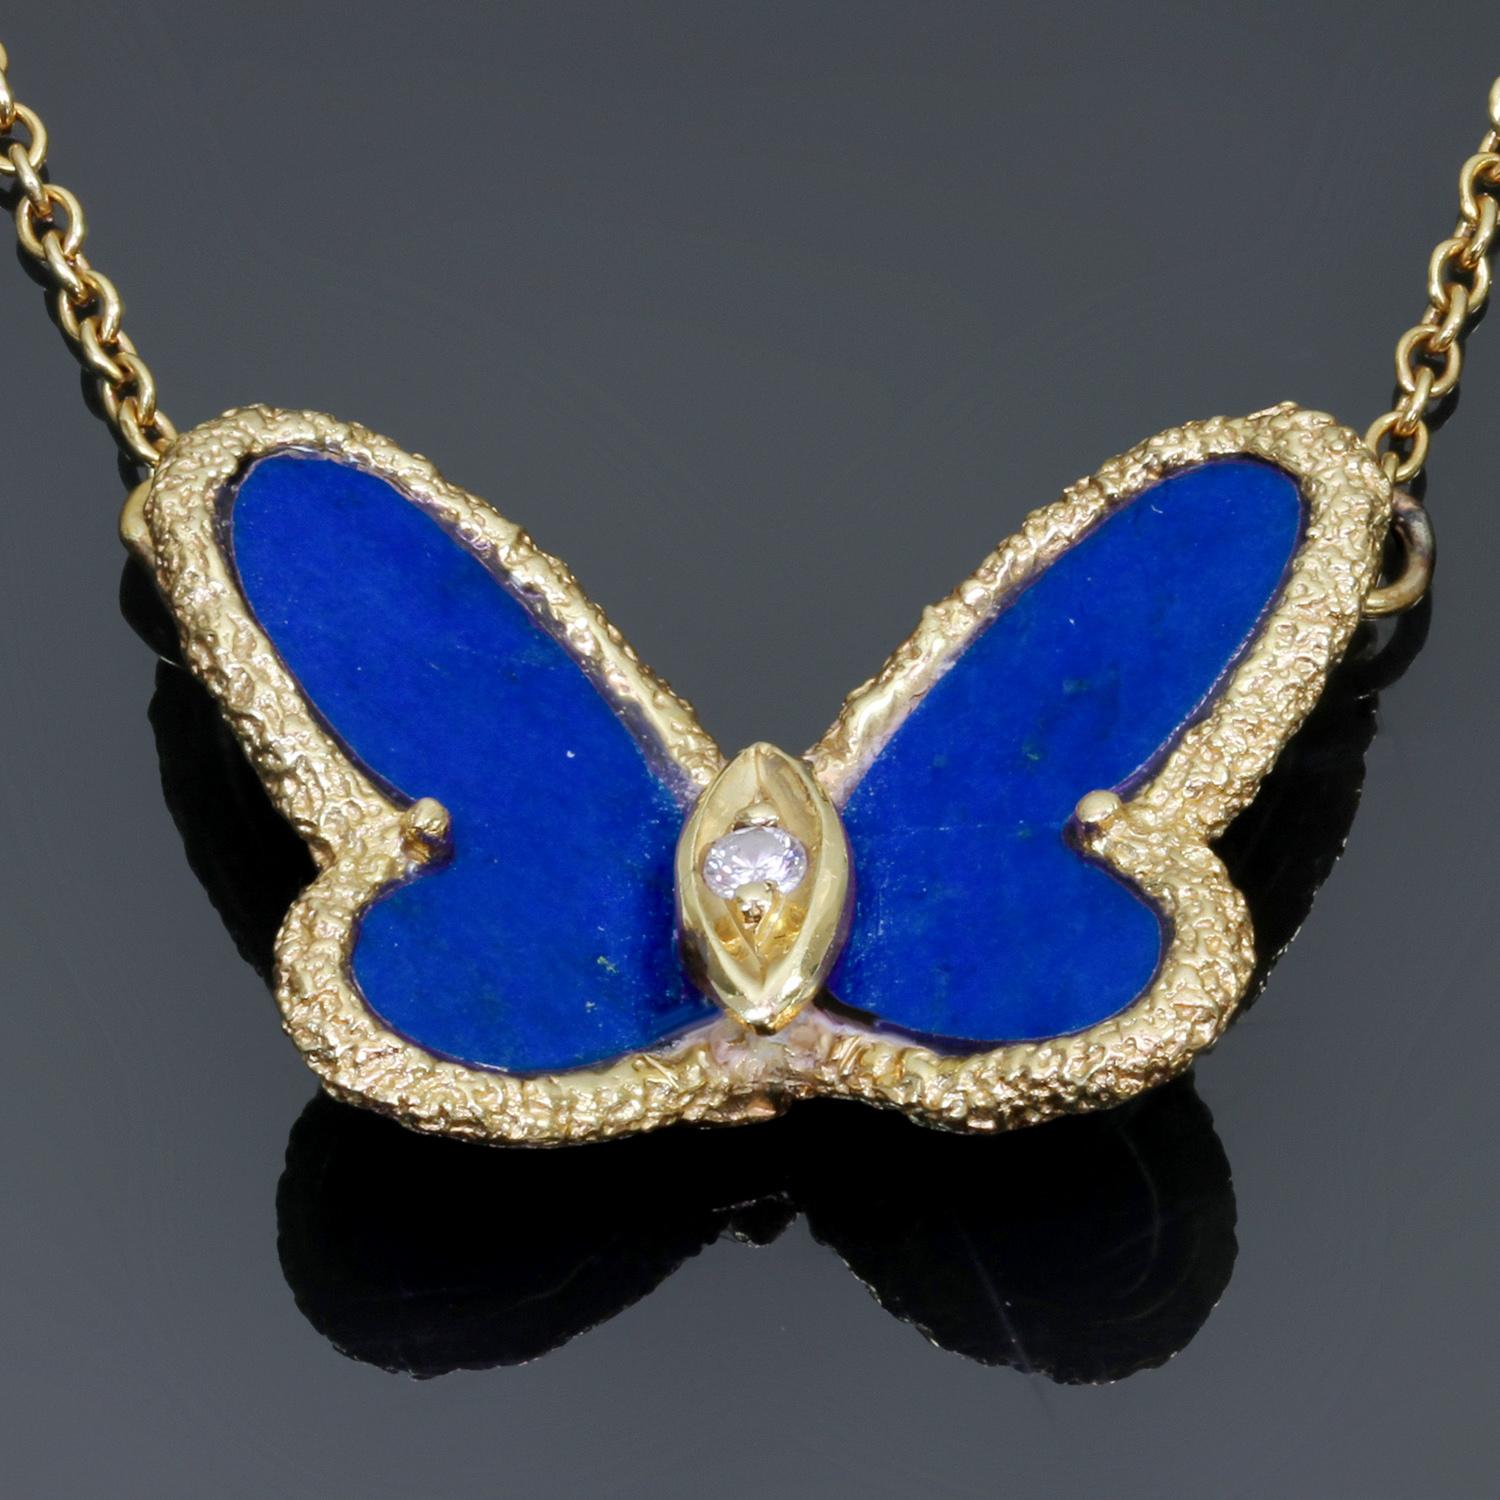 This stunning vintage Van Cleef & Arpels necklace from the iconic Flying Beauties collection is crafted in textured 18k yellow gold and features a butterfly pendant accented with blue lapis lazuli wings and a solitaire brilliant-cut diamond of an